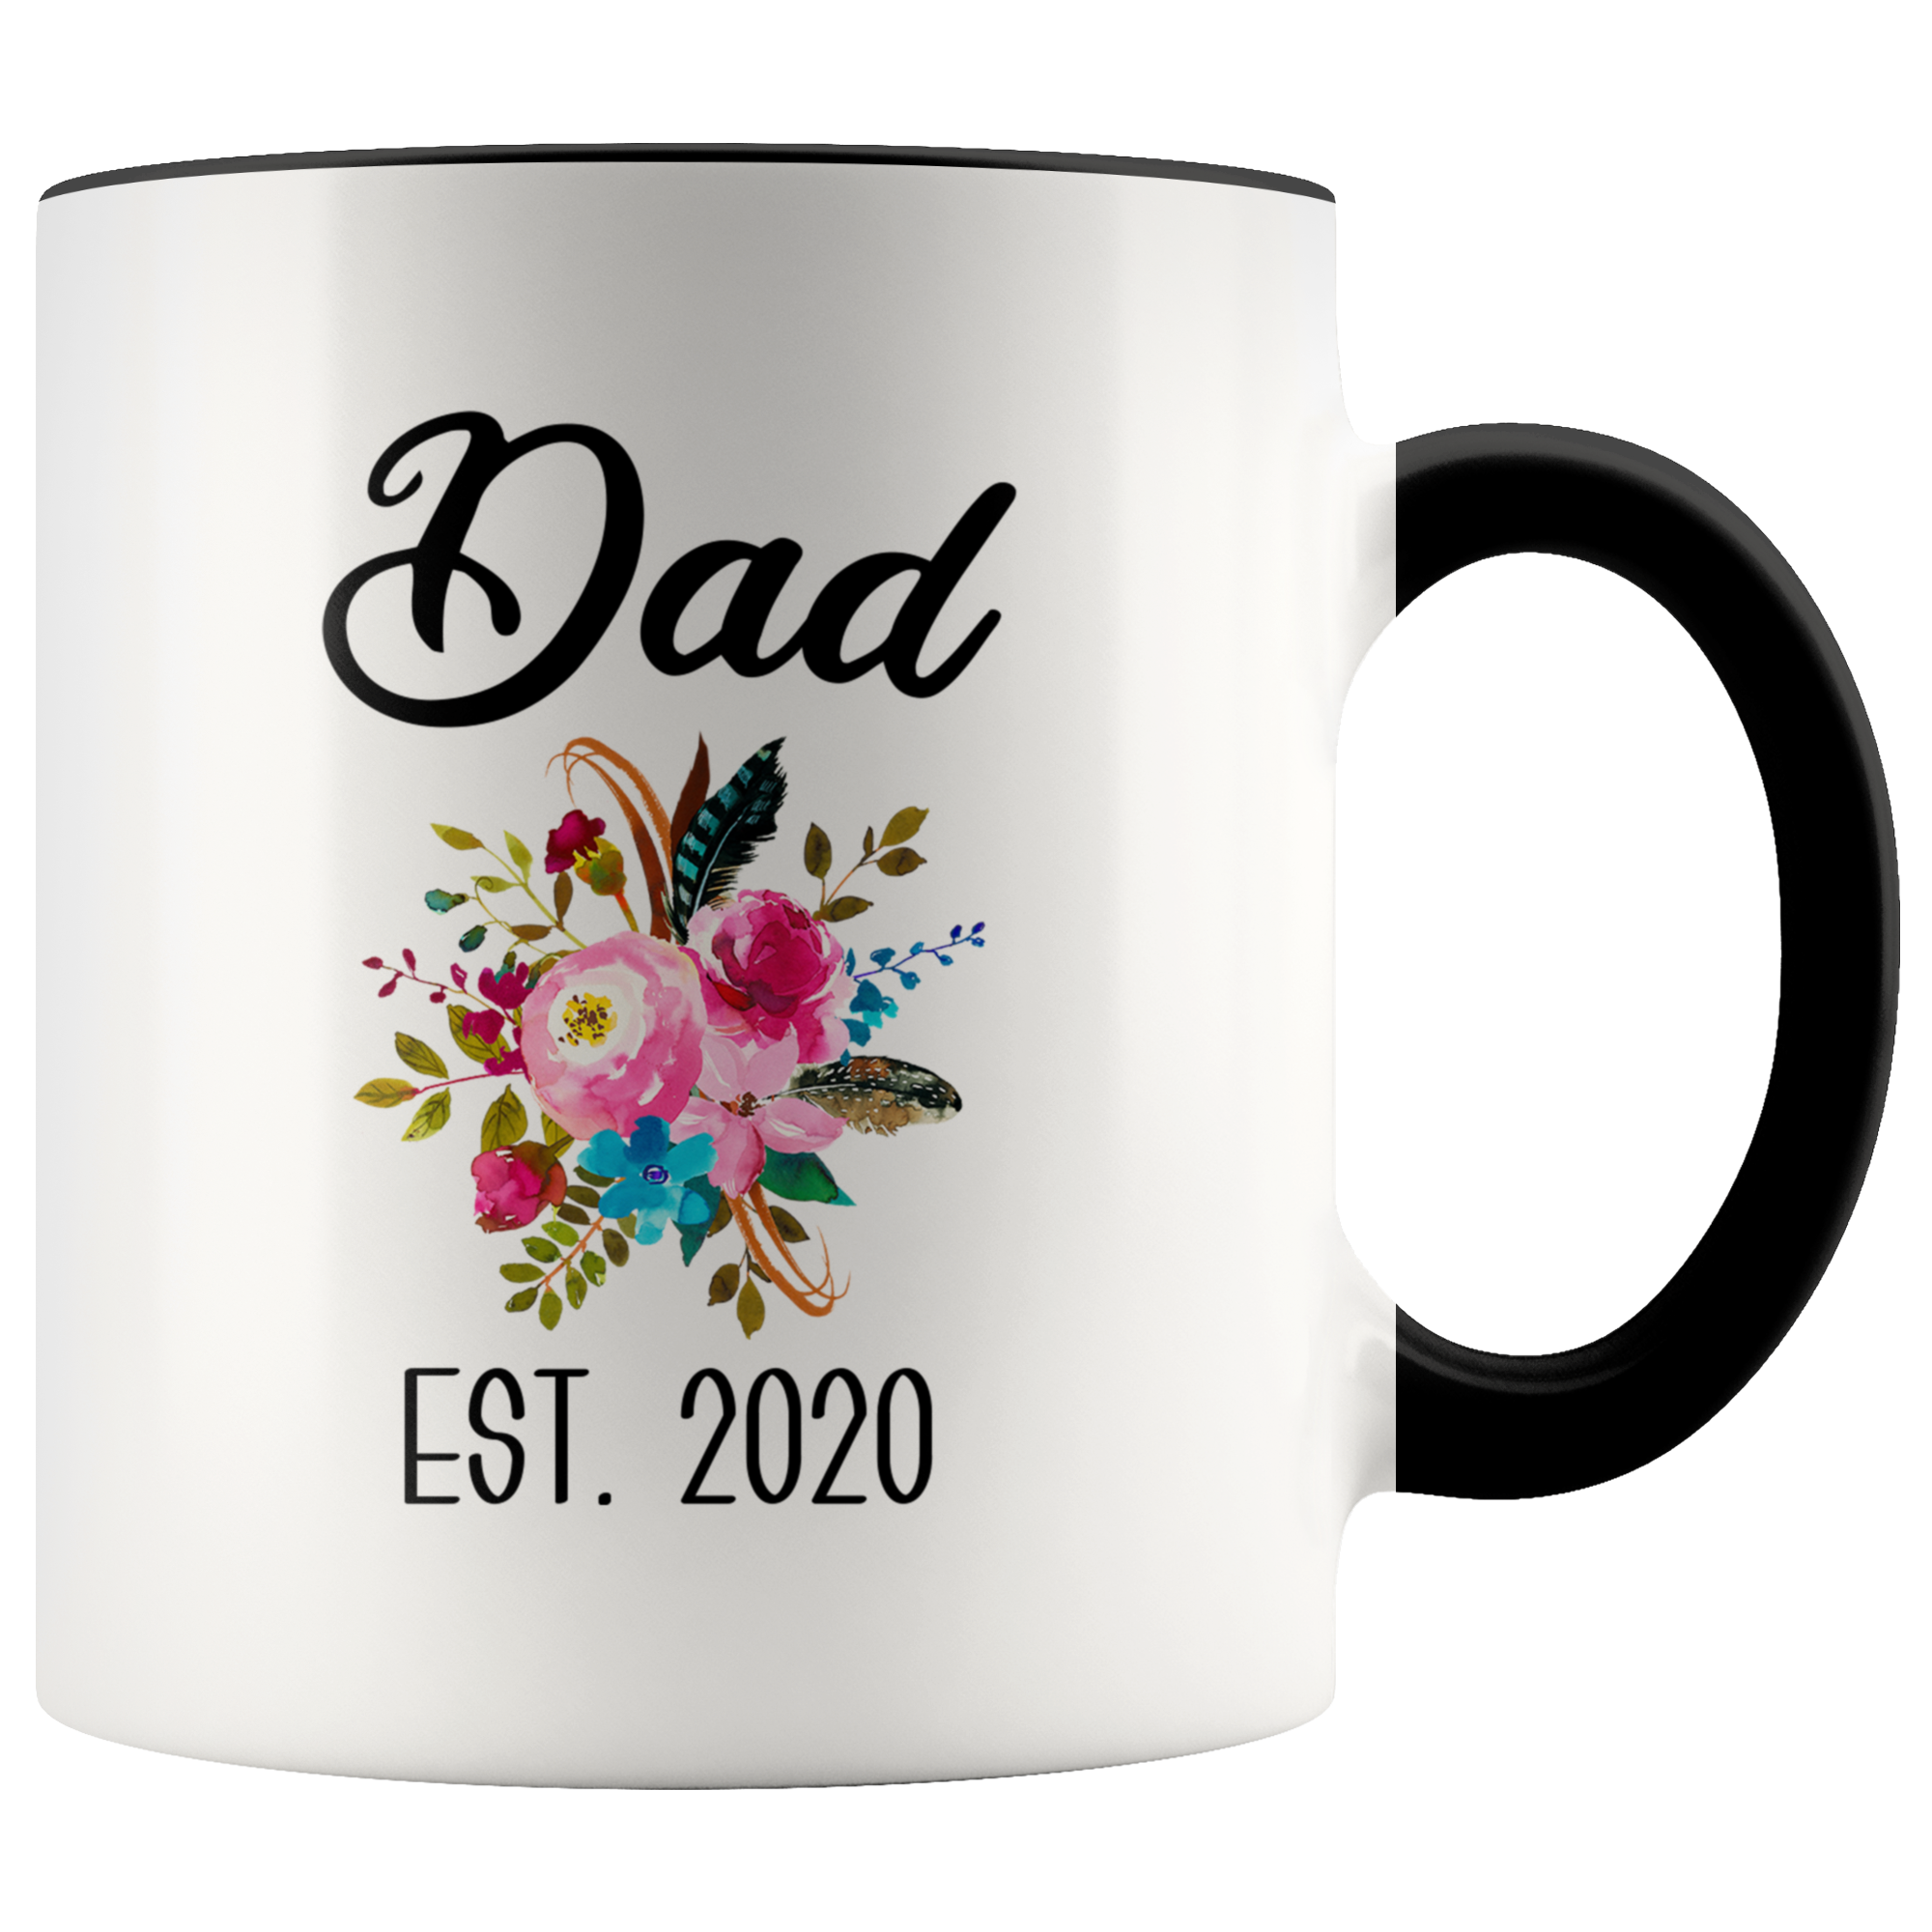 New Dad Mug Expecting Daddy to Be Gifts Baby Shower Gift Pregnancy Announcement Coffee Cup Dad Est 2020